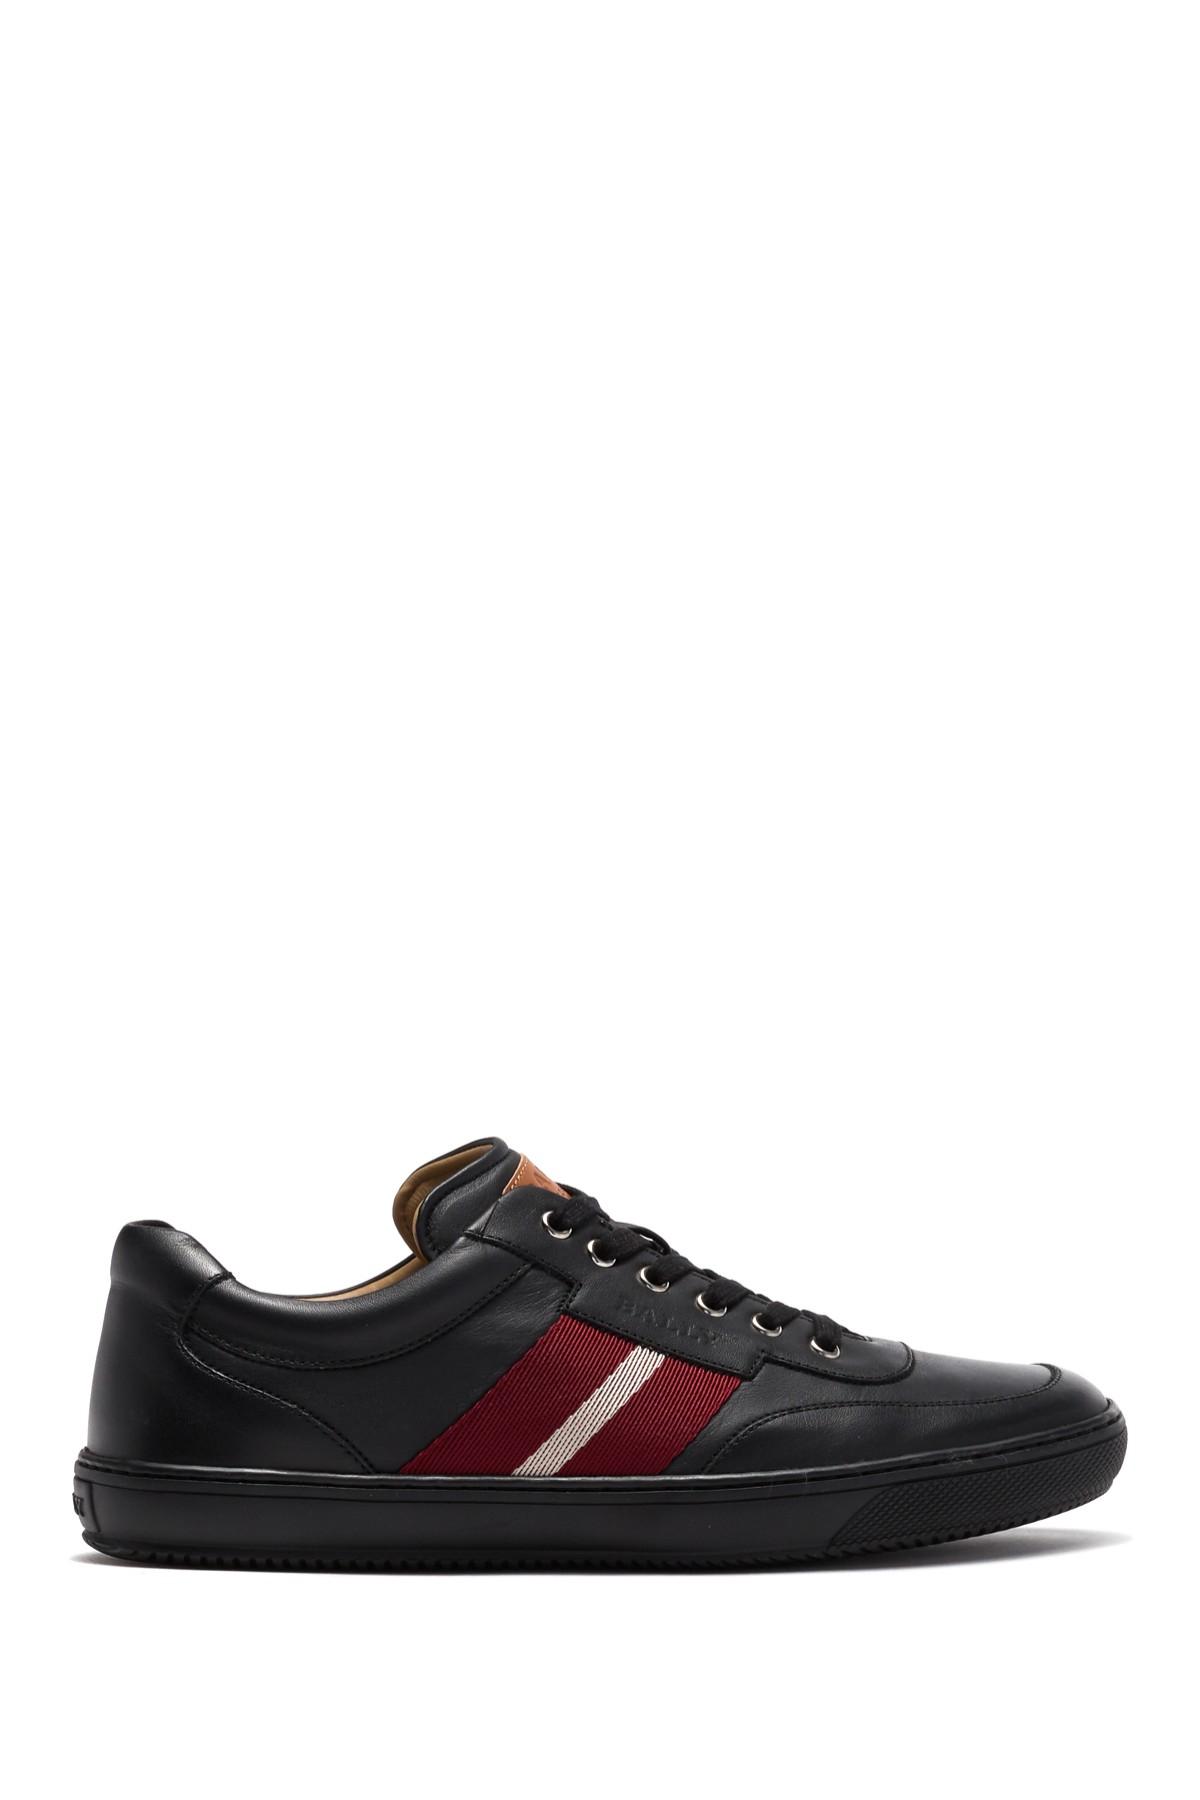 Bally Leather Oriano Lace-up Sneaker in Black for Men - Lyst